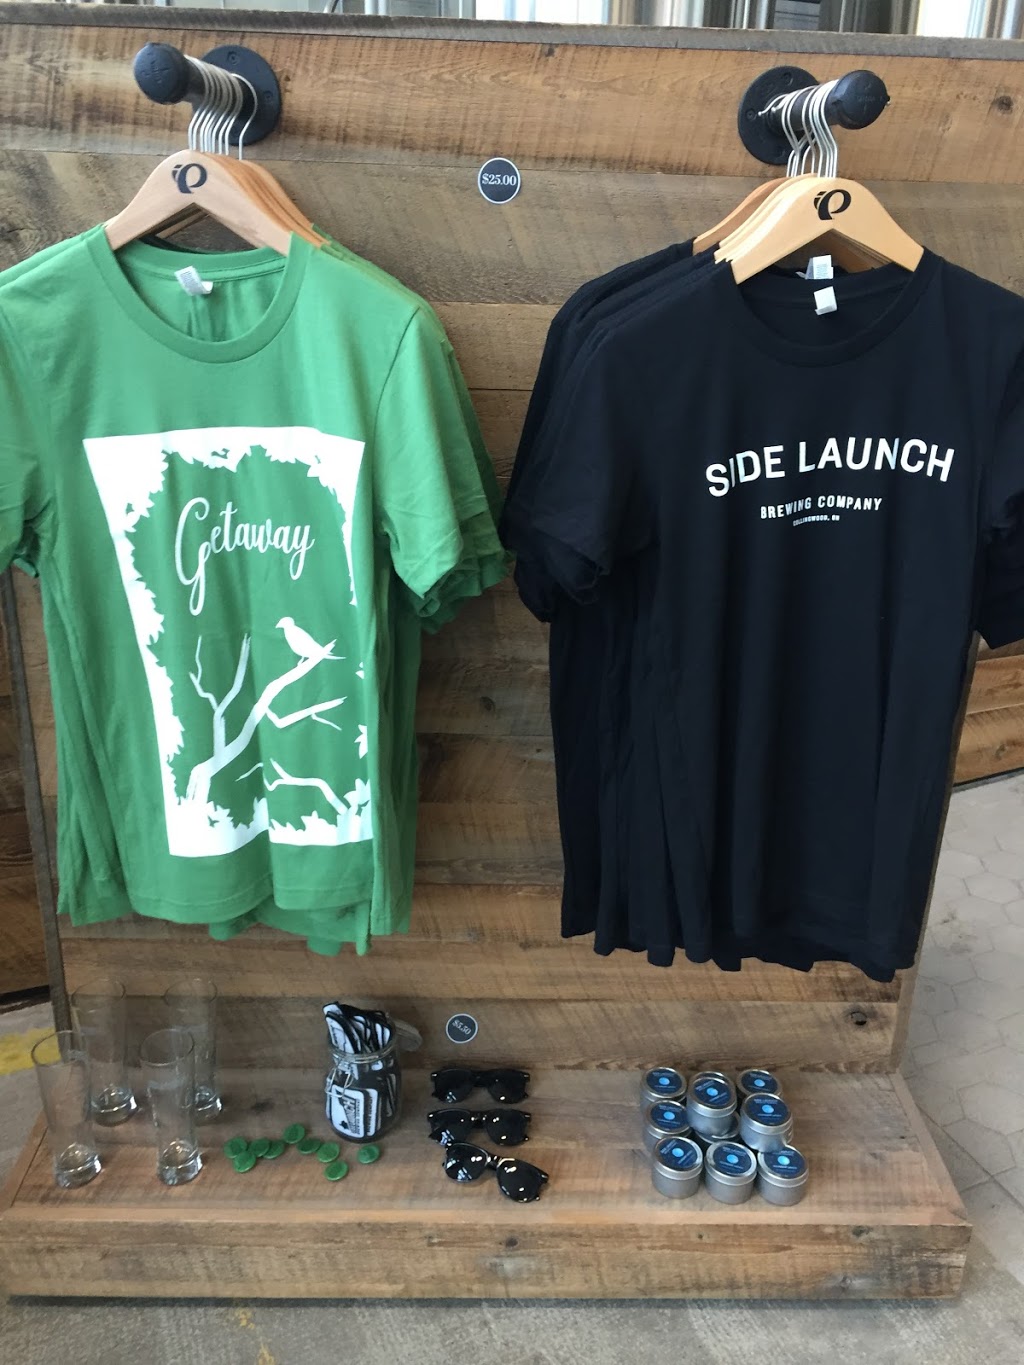 Side Launch Brewing Company Inc. | 200 Mountain Rd Unit 1, Collingwood, ON L9Y 4V5, Canada | Phone: (705) 293-5511